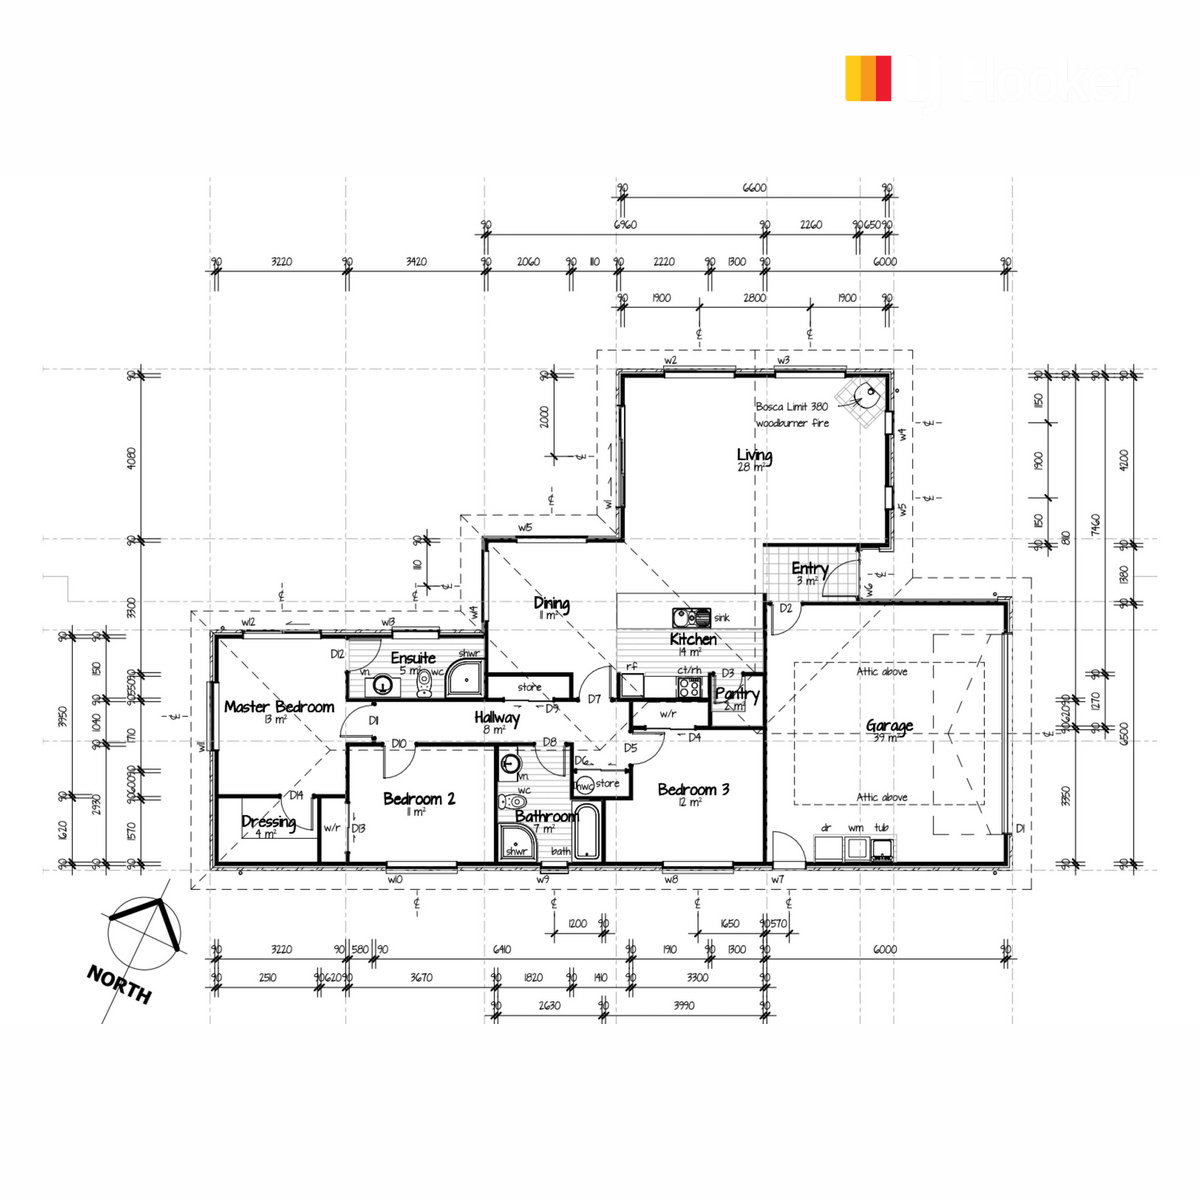 2 Silverview Place Mosgielproperty floorplan image